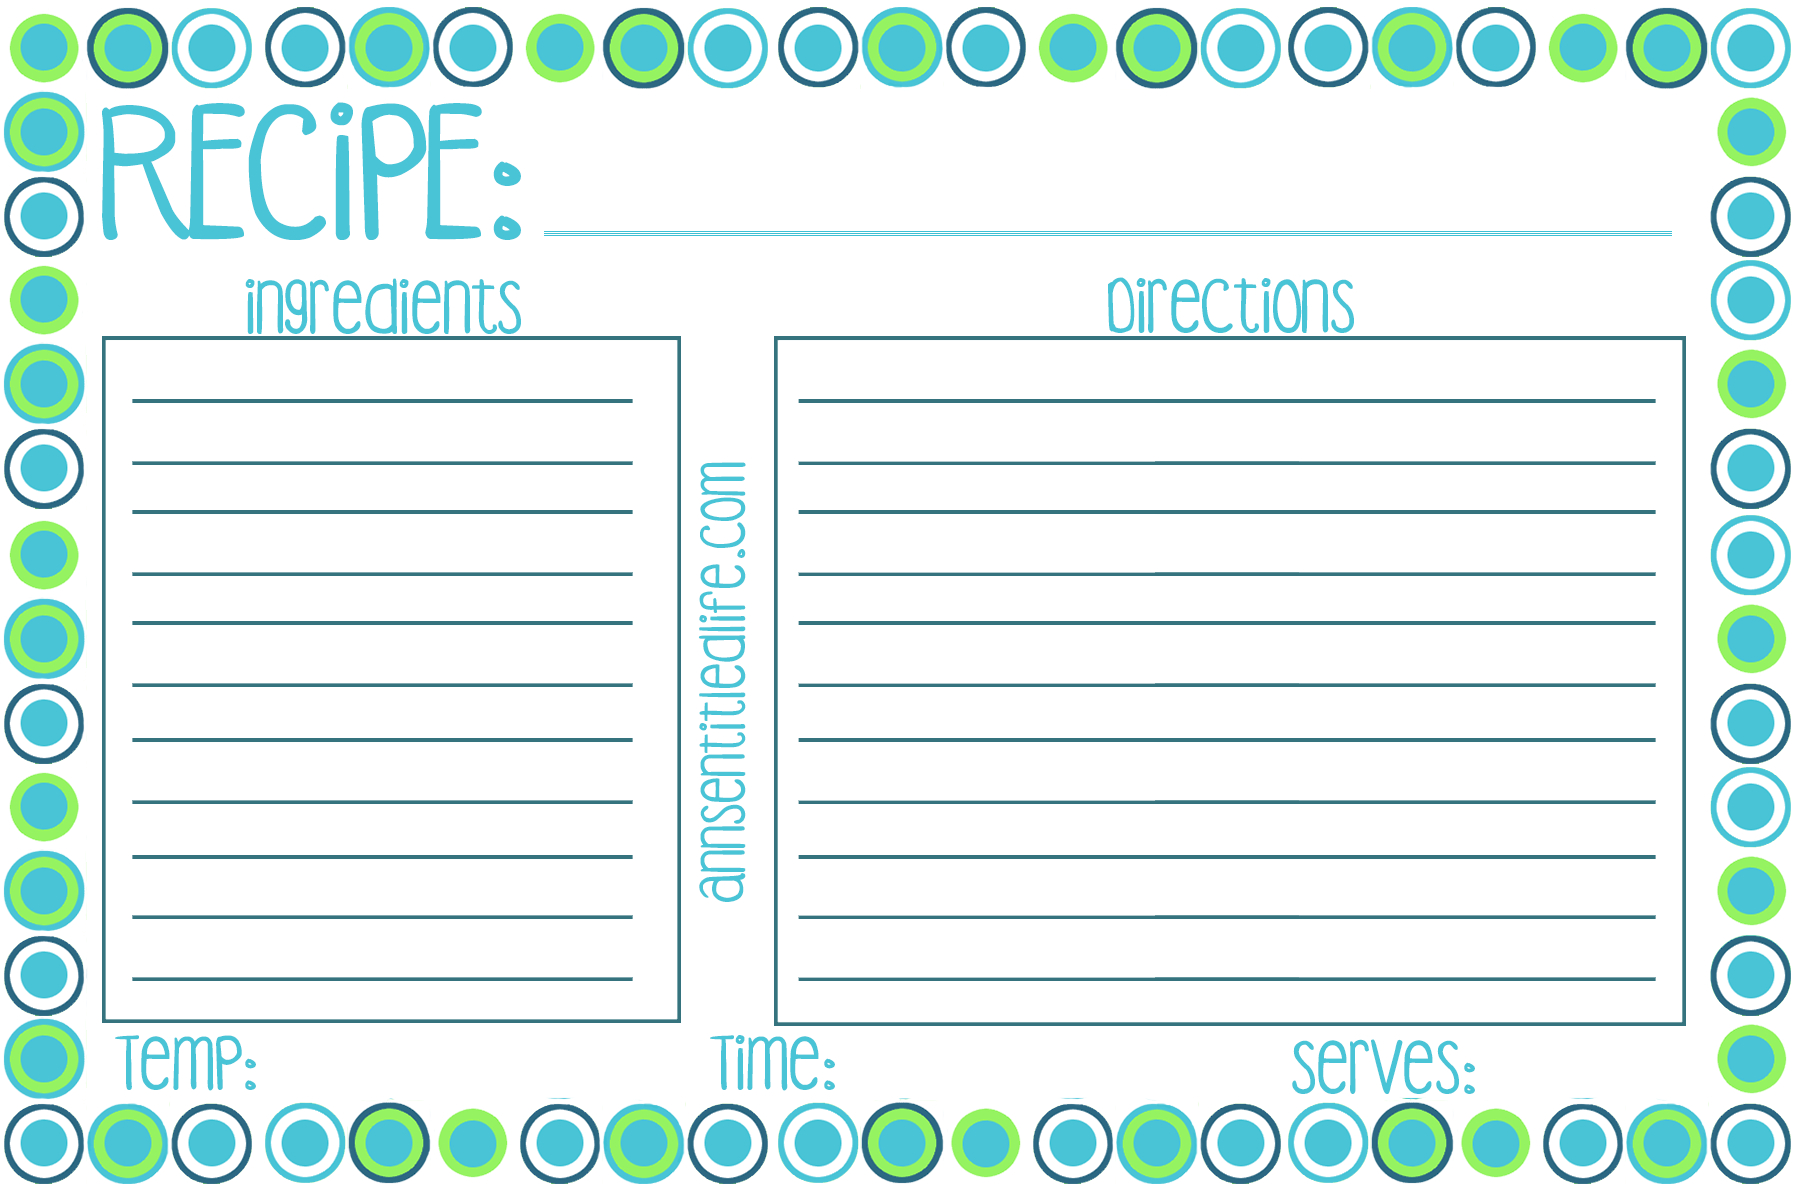 Free Printable Recipe Card, Meal Planner And Kitchen Labels - Free Printable Recipe Cards